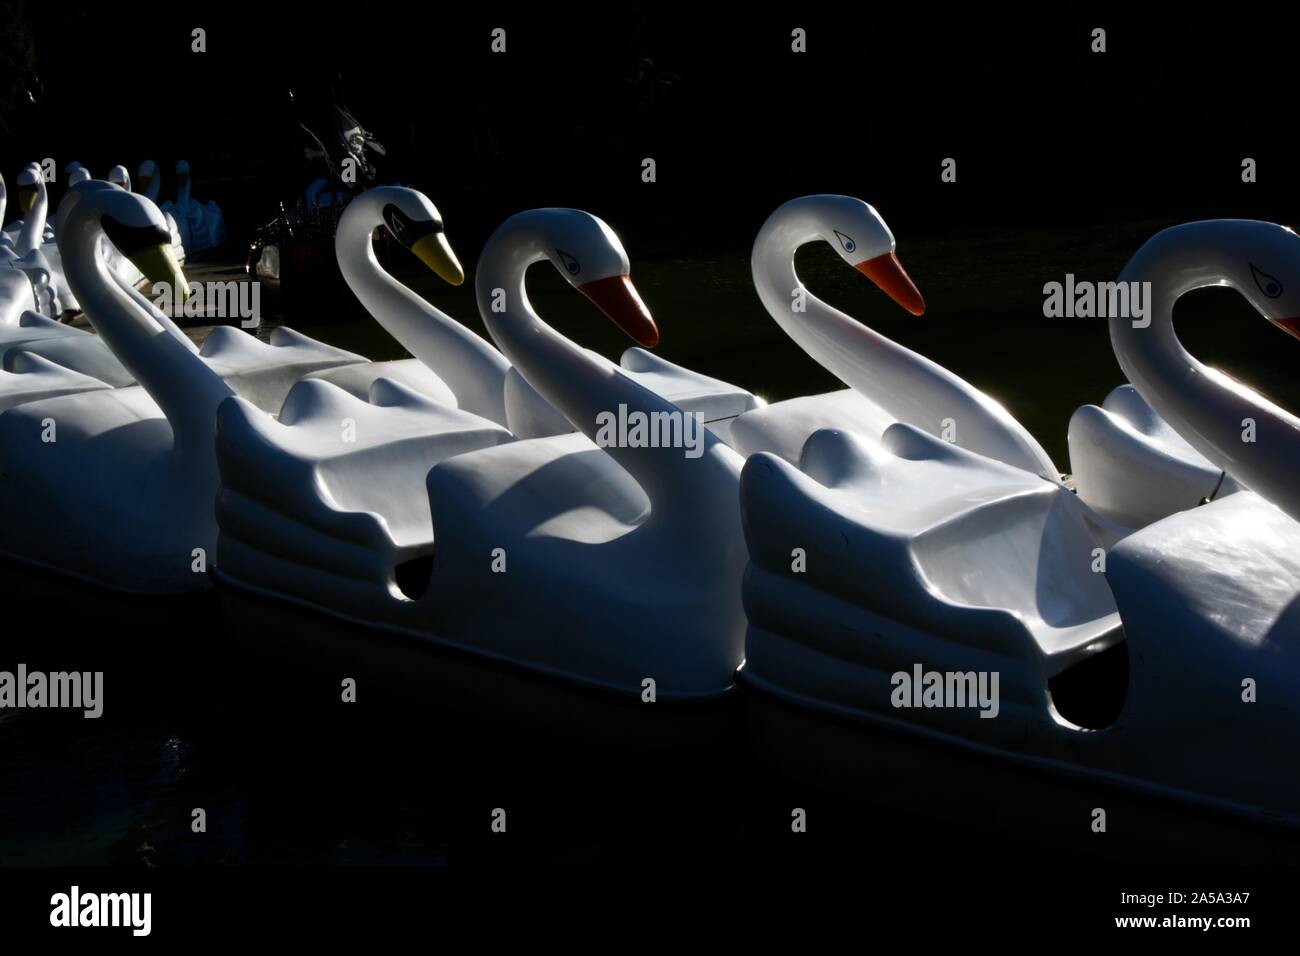 Lineup of swan rides in the lake at a park Stock Photo